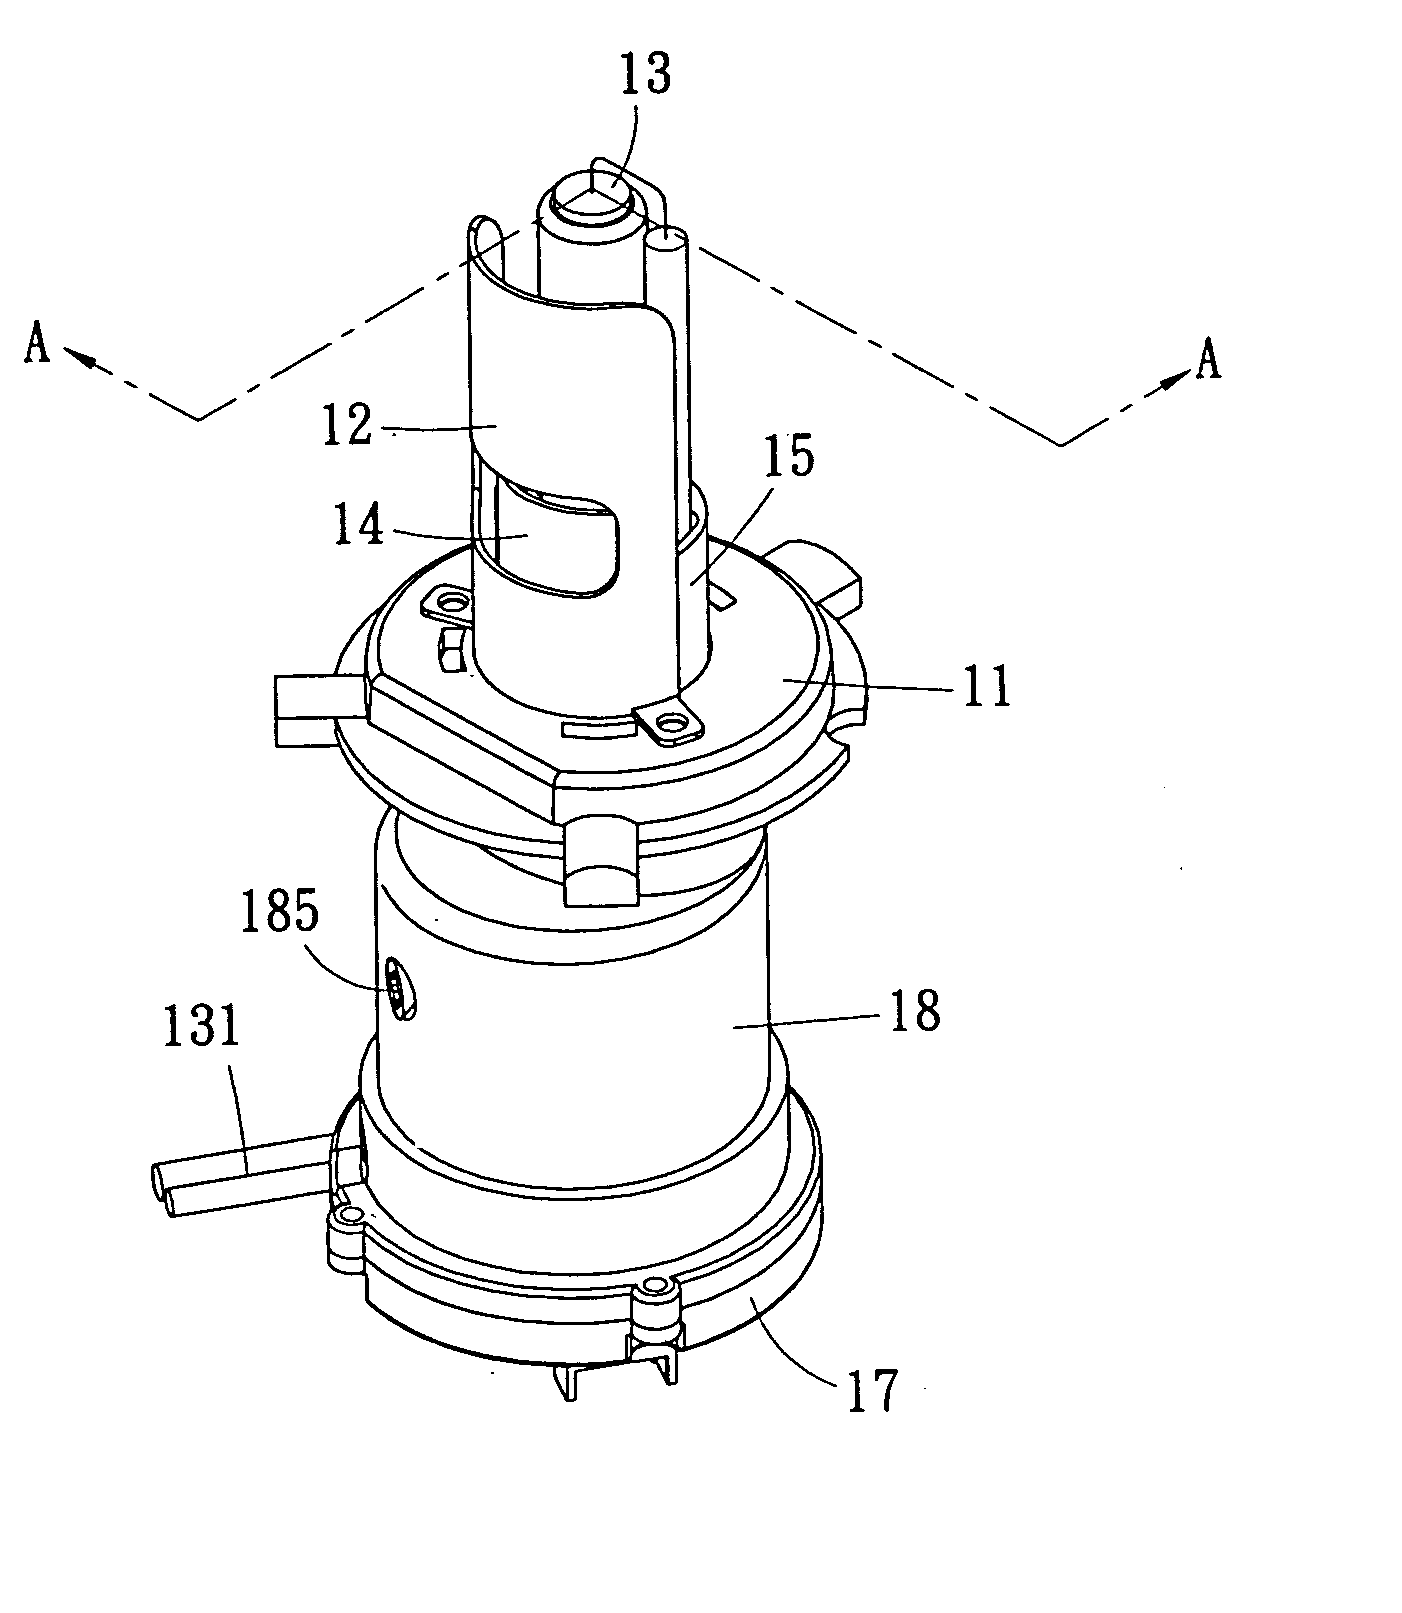 Adjusted structure of discharge headlight